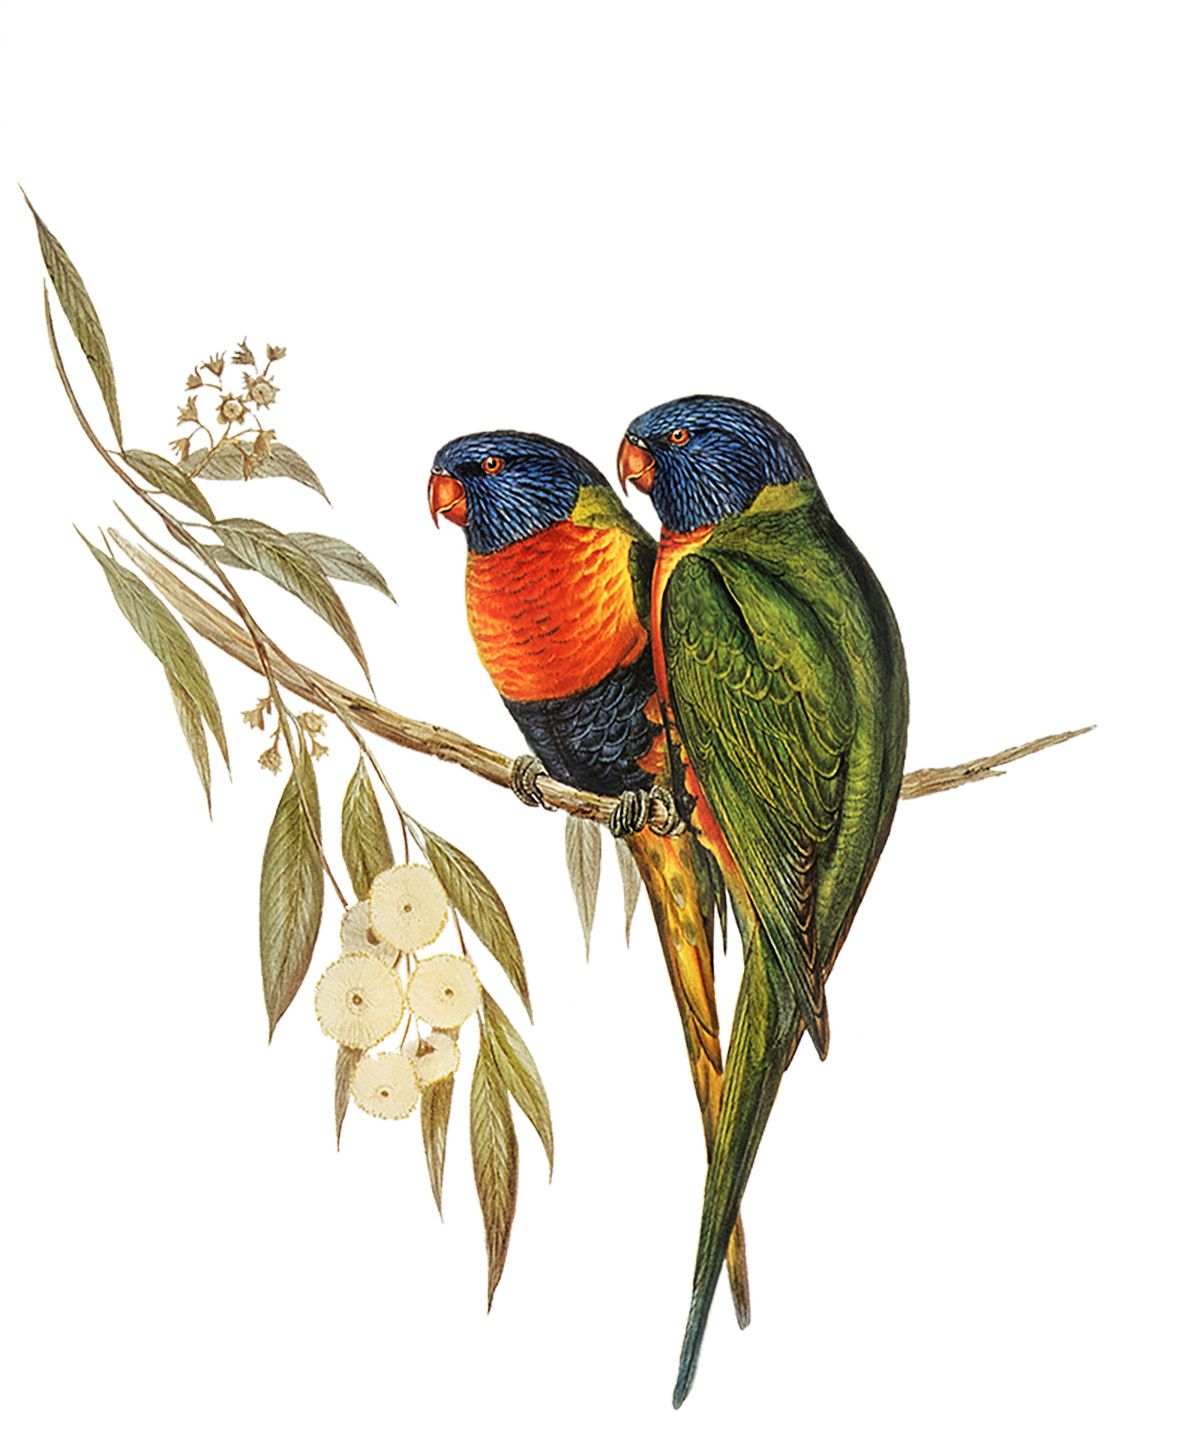 Illustration of two colorful birds sitting on a branch